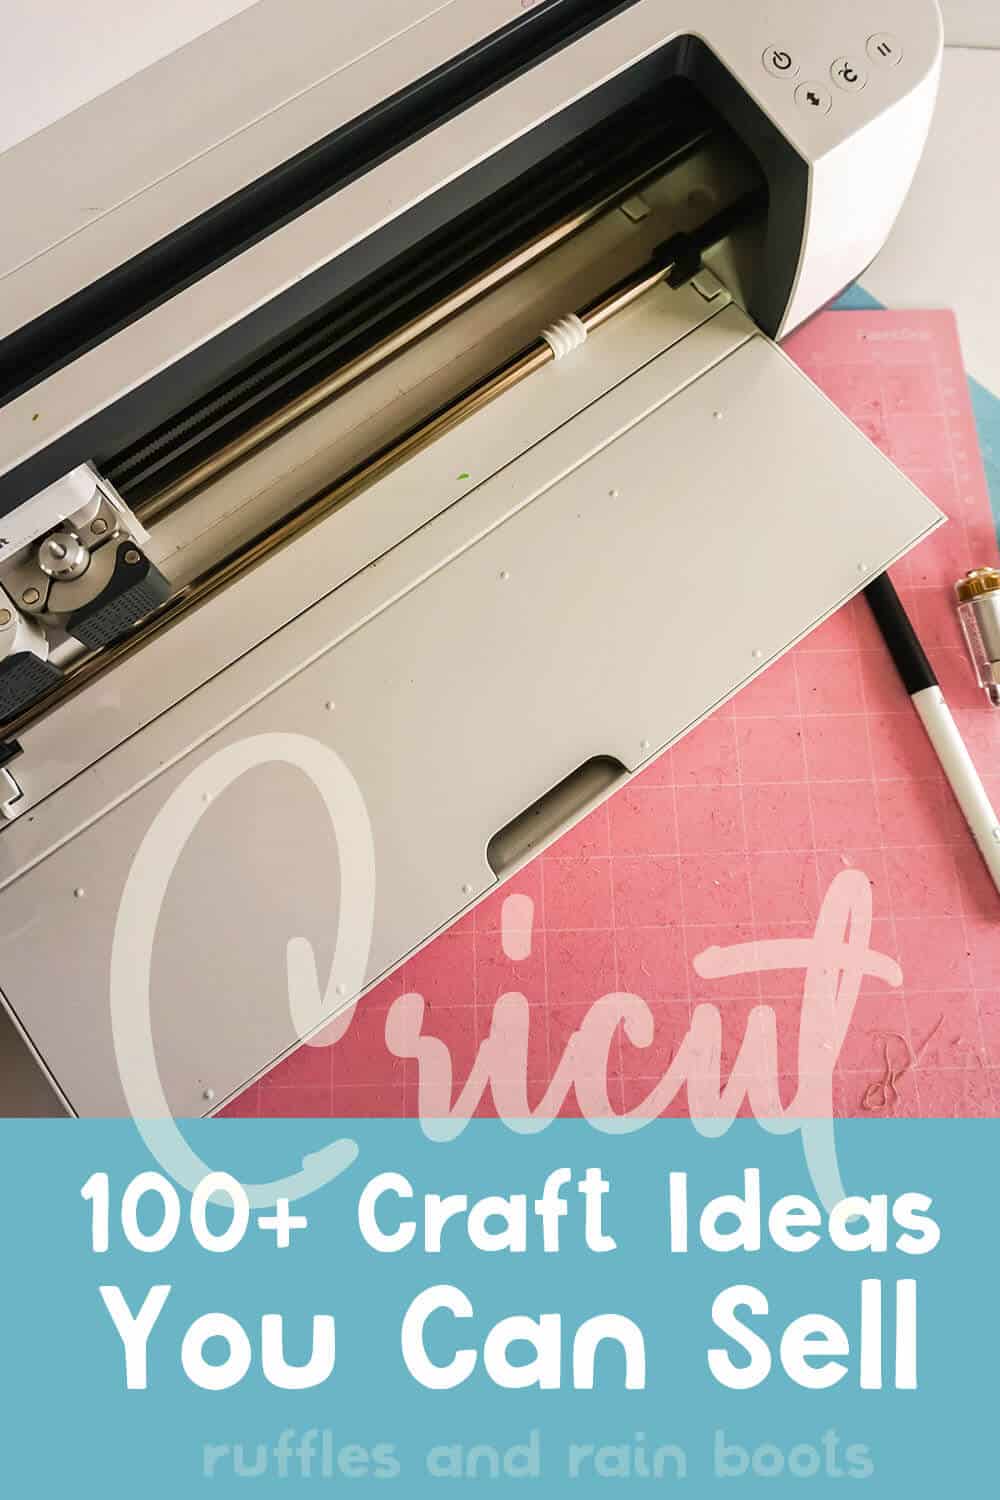 overhead view of cricut tools needed to make crafts to sell on etsy with text which reads cricut 100+ craft ideas you can sell